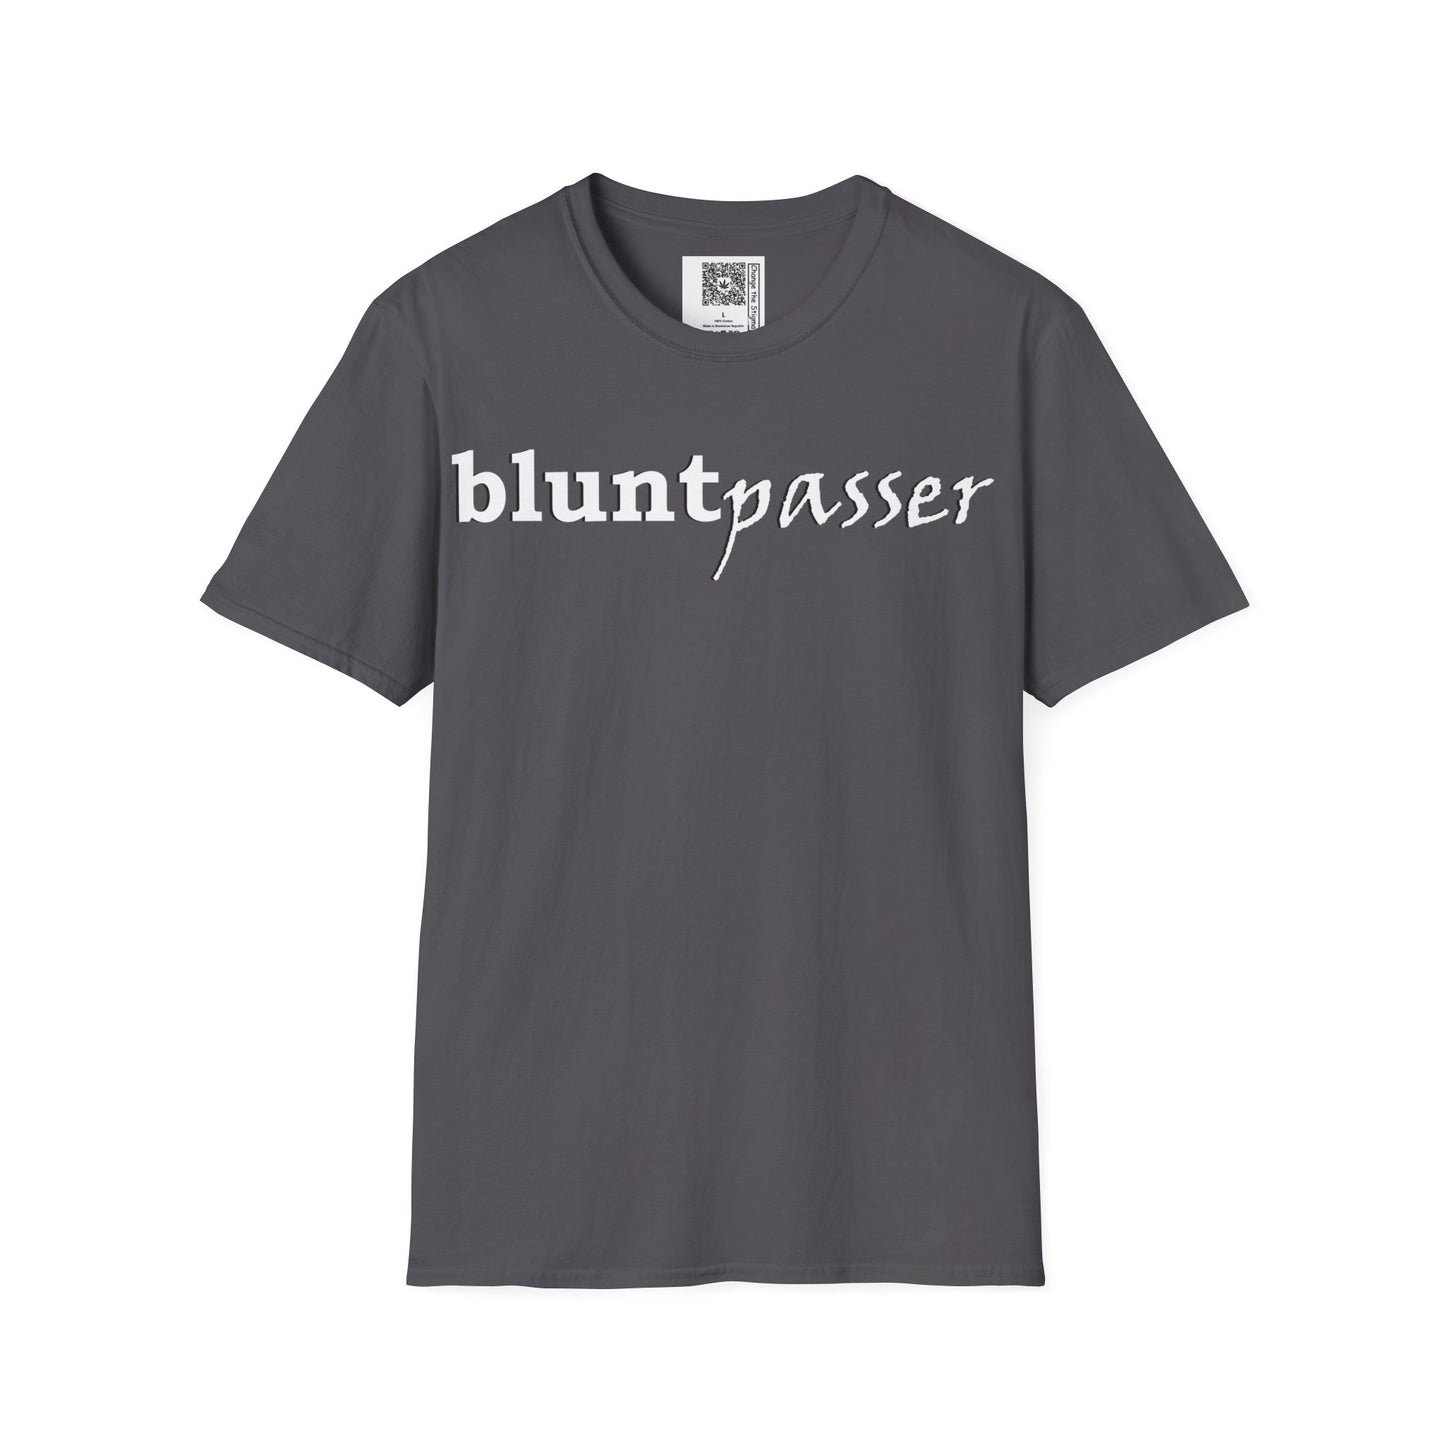 Change the Stigma, Charcoal color, shirt saying "blunt passer", Shirt is open displayed, Qr code is shown